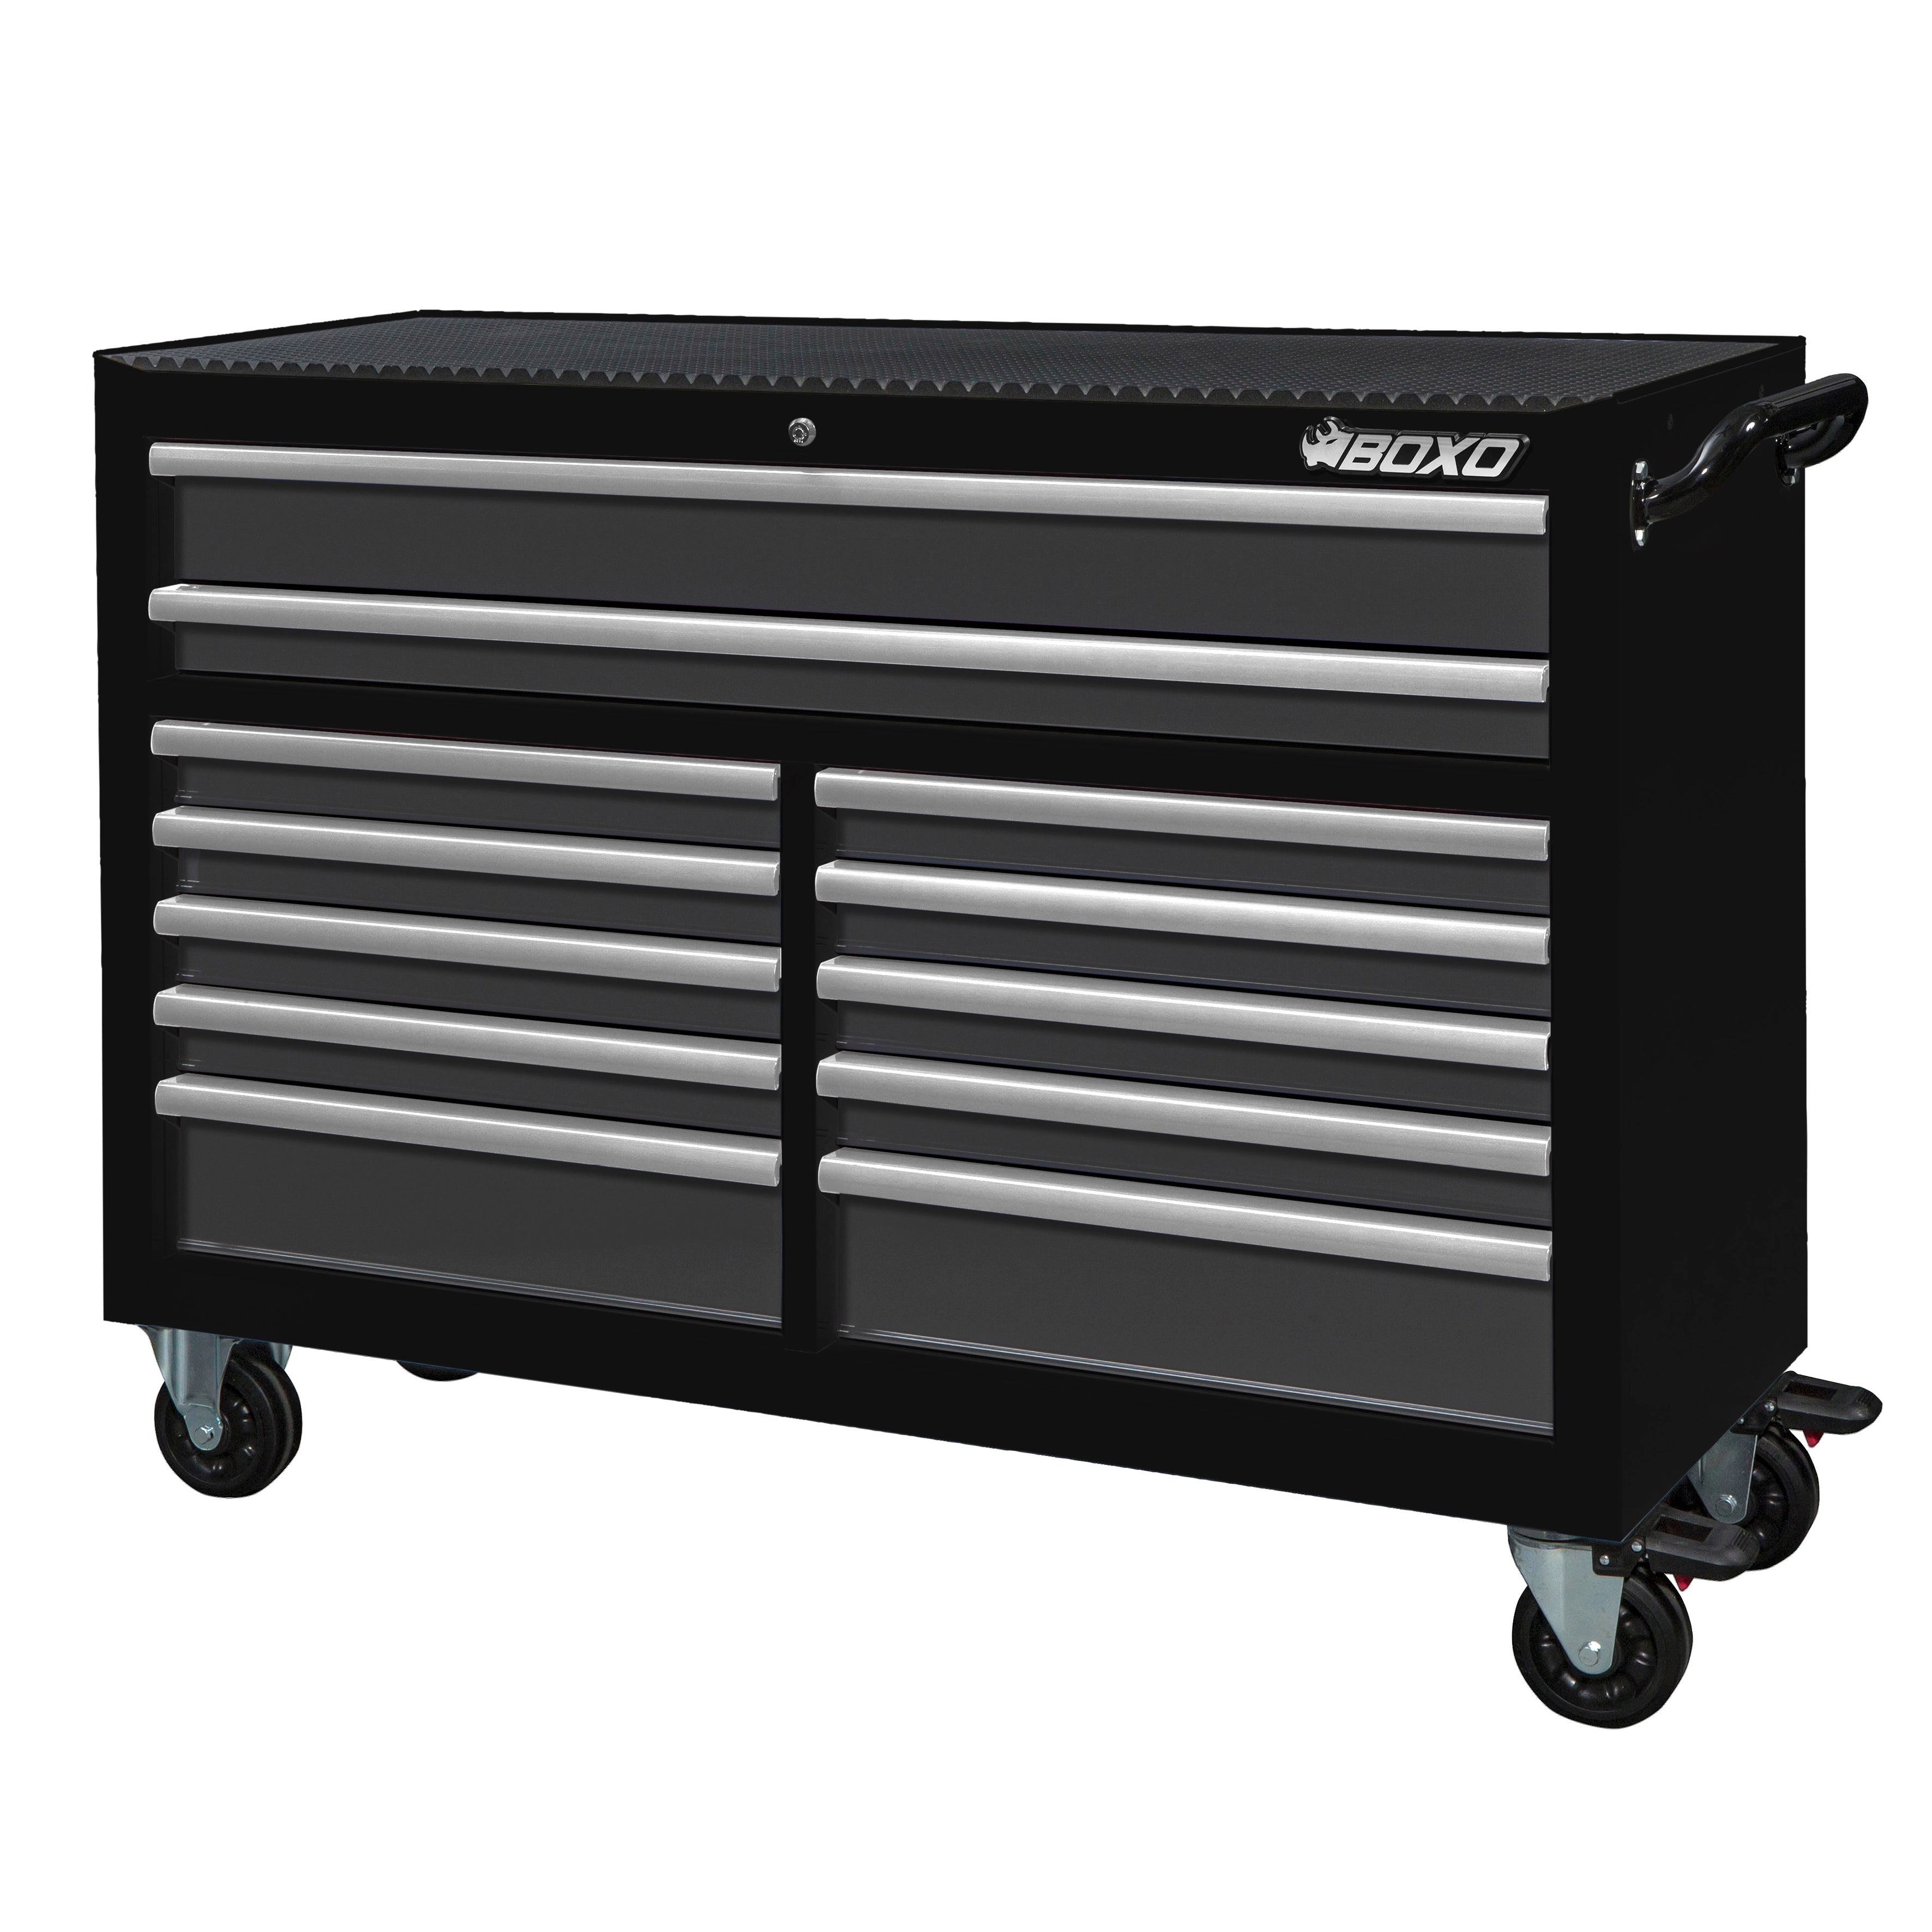 BOXO 53" 12 Drawer Roll Cabinet with Drawer Trim Pack - Black Body with Trim Colour Options